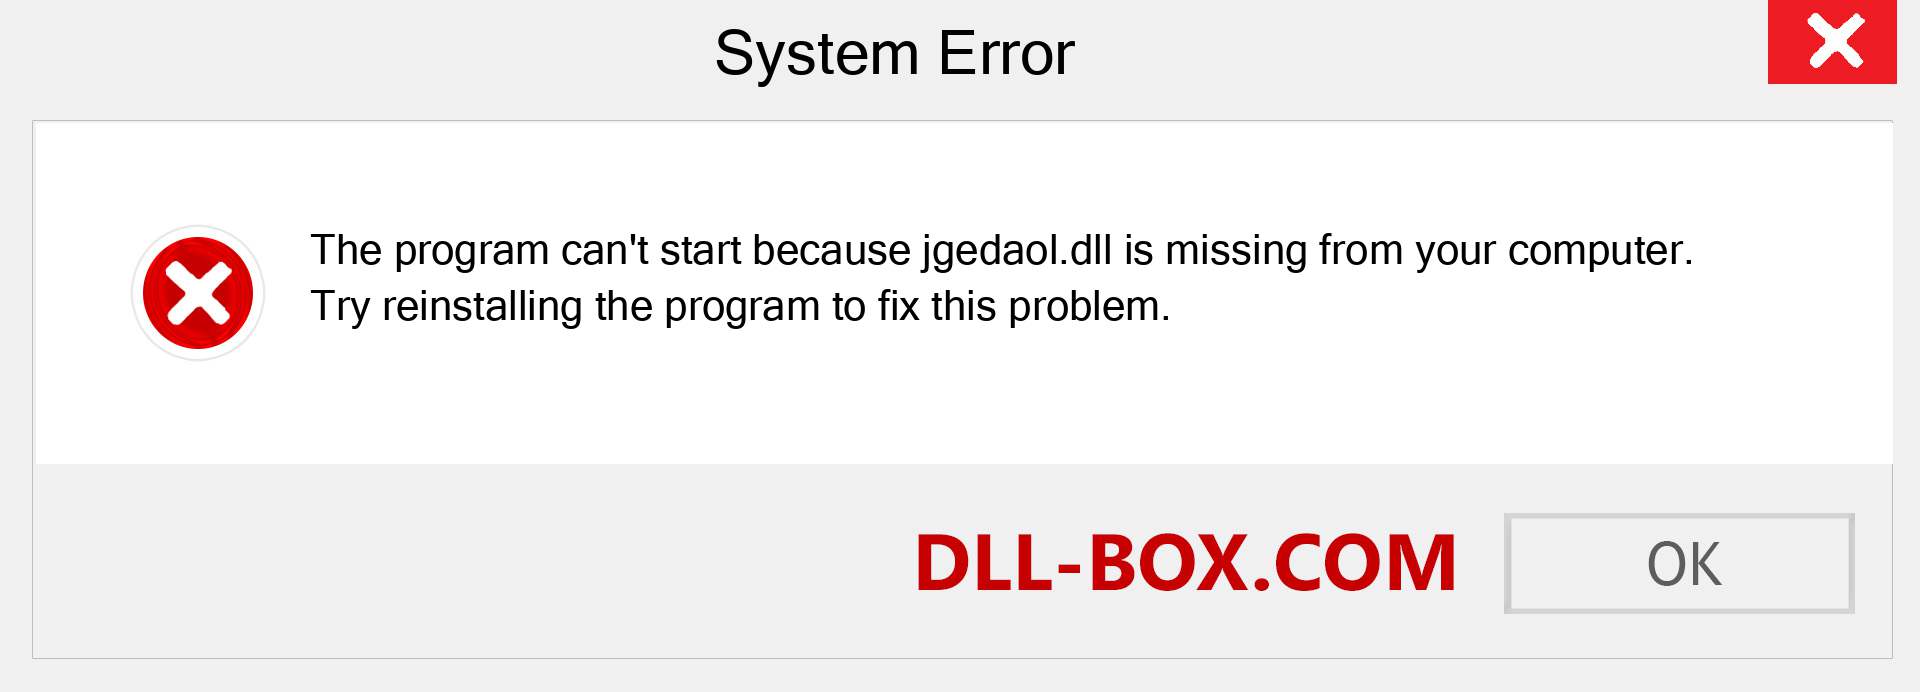  jgedaol.dll file is missing?. Download for Windows 7, 8, 10 - Fix  jgedaol dll Missing Error on Windows, photos, images